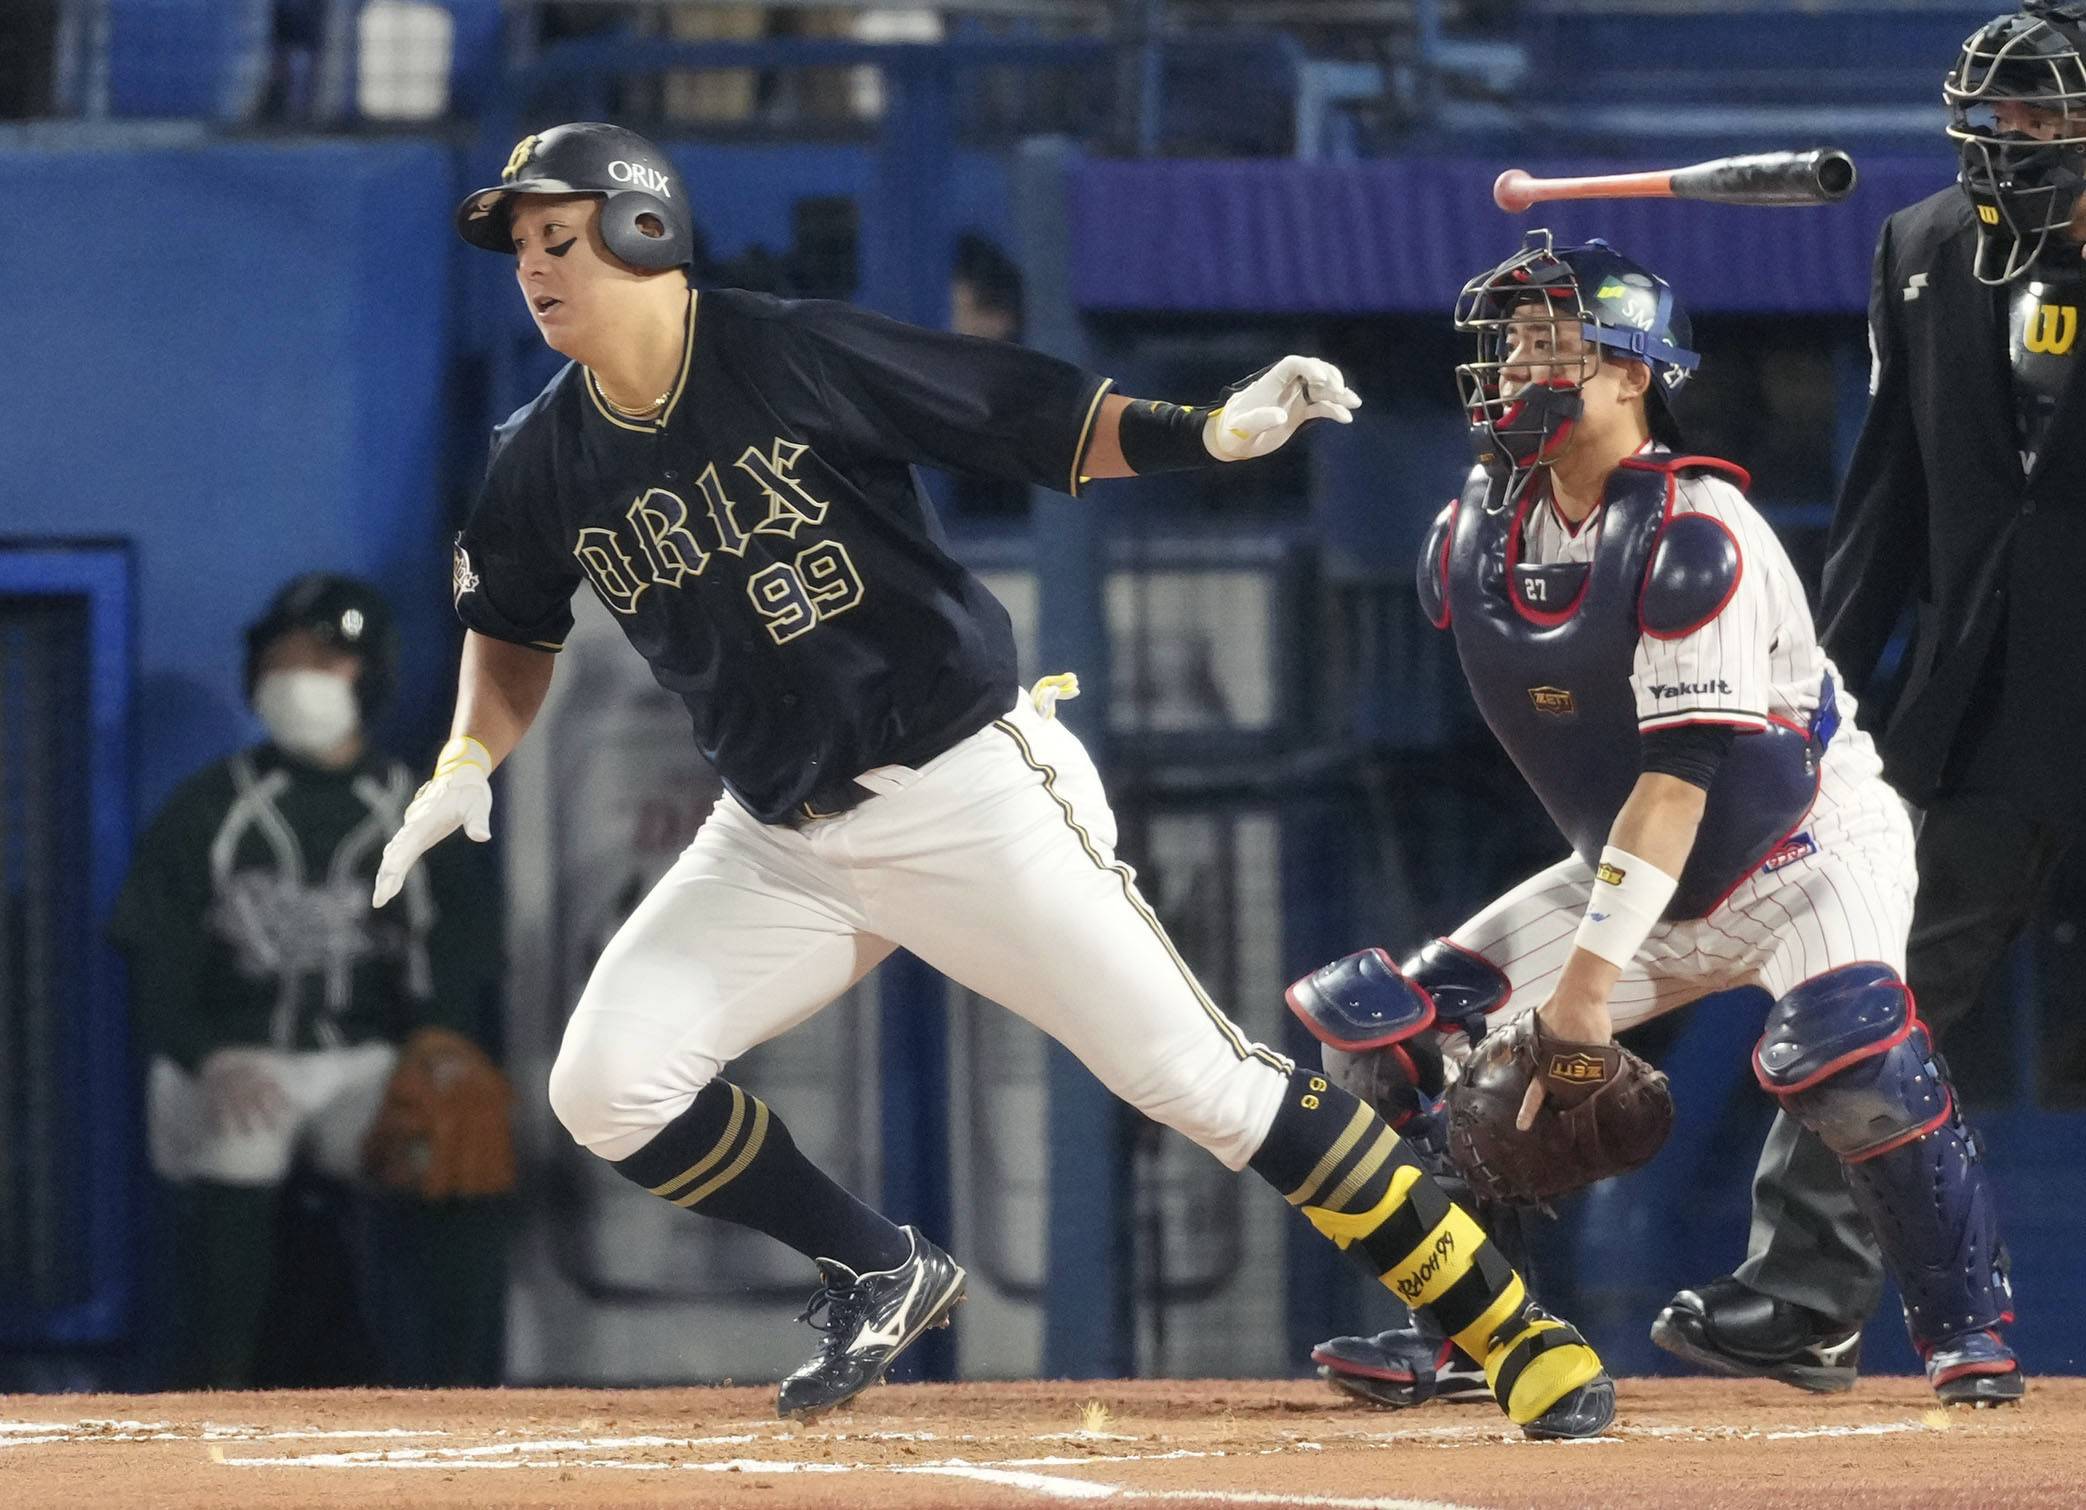 Buffaloes move to brink of Japan Series crown with victory in Game 6